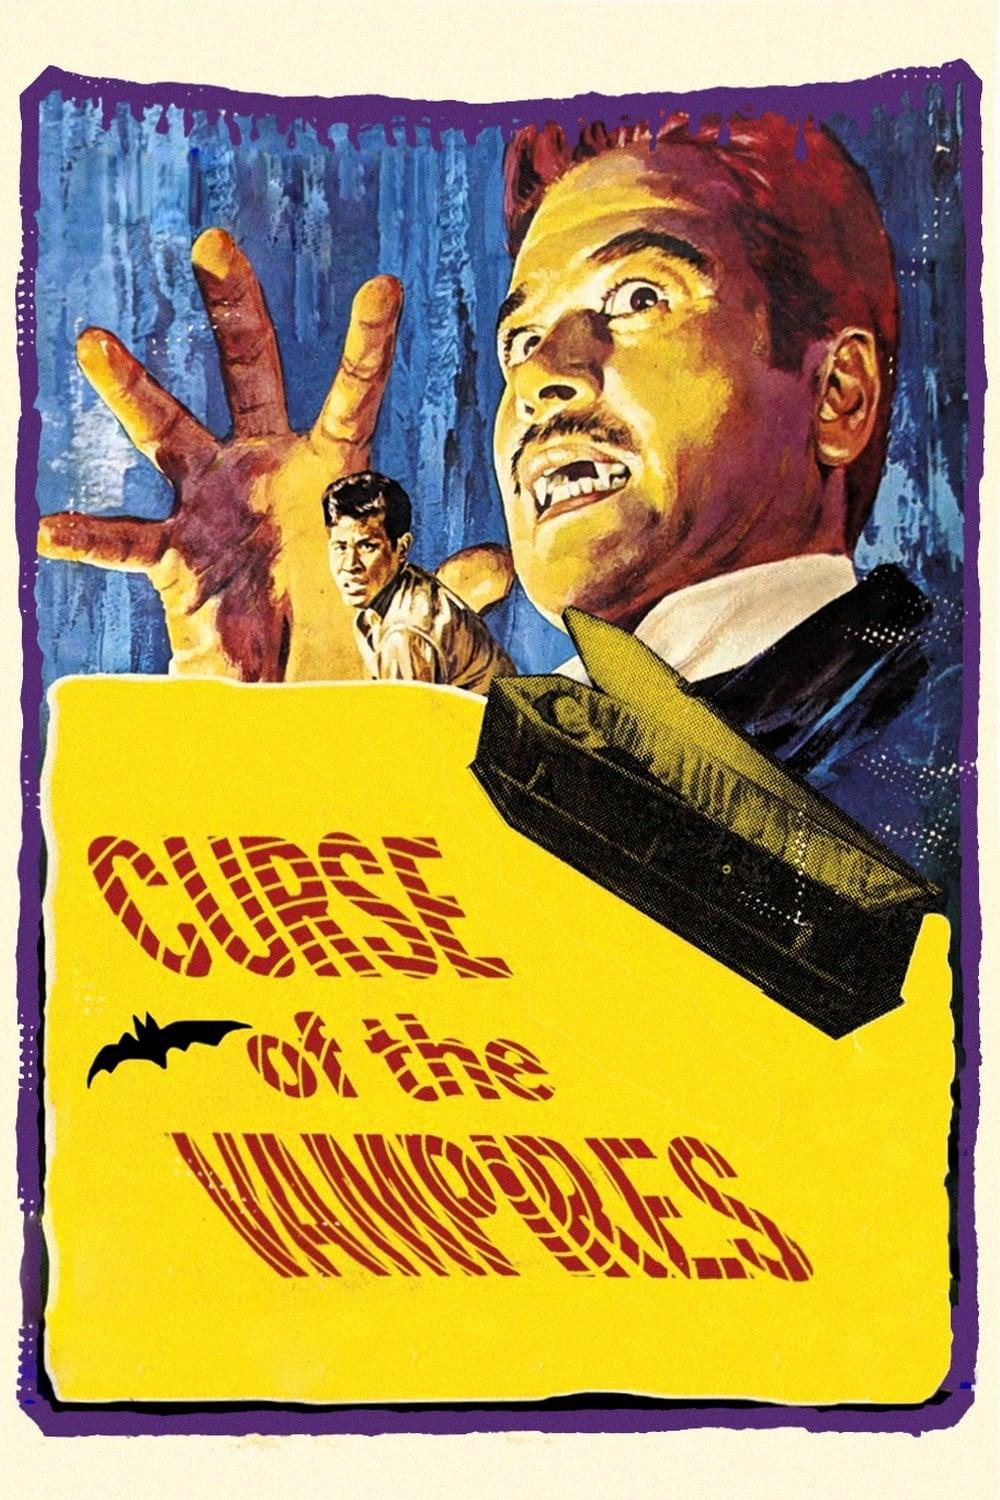 Curse of the Vampires poster